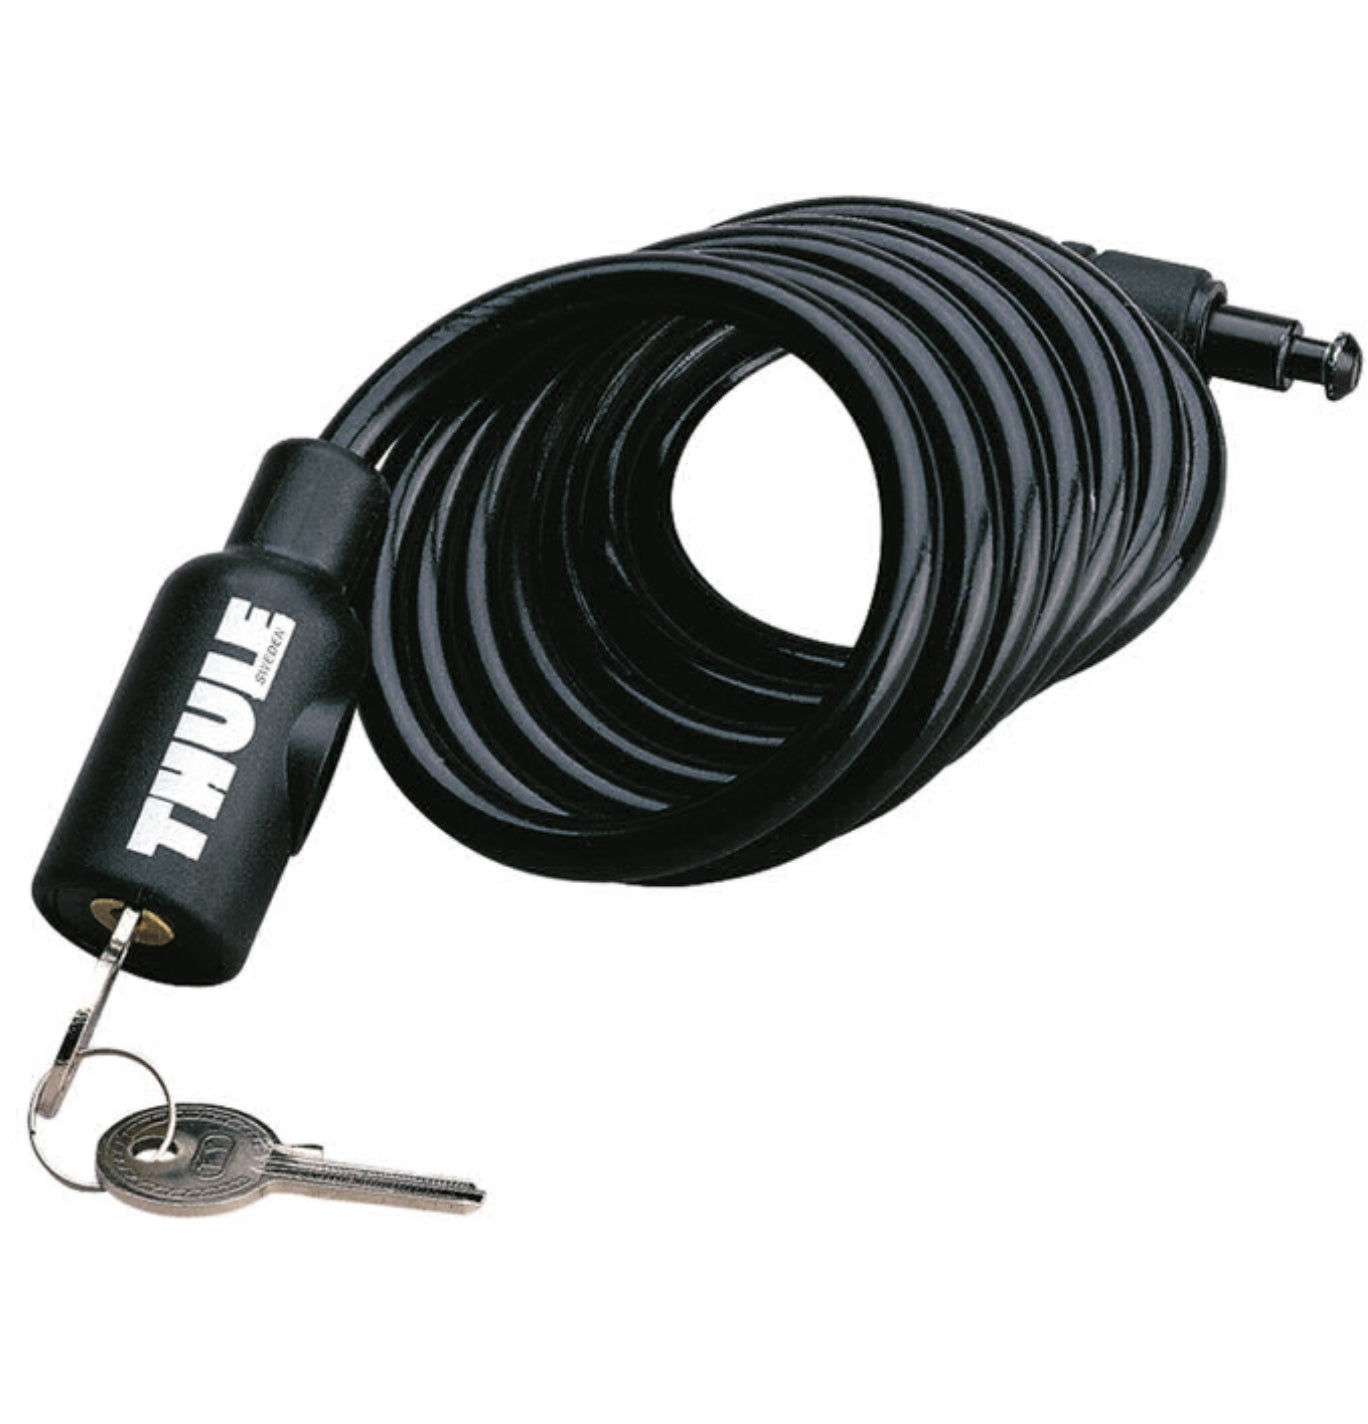 Thule Security Cable Lock 1.80m for Bike Racks Image